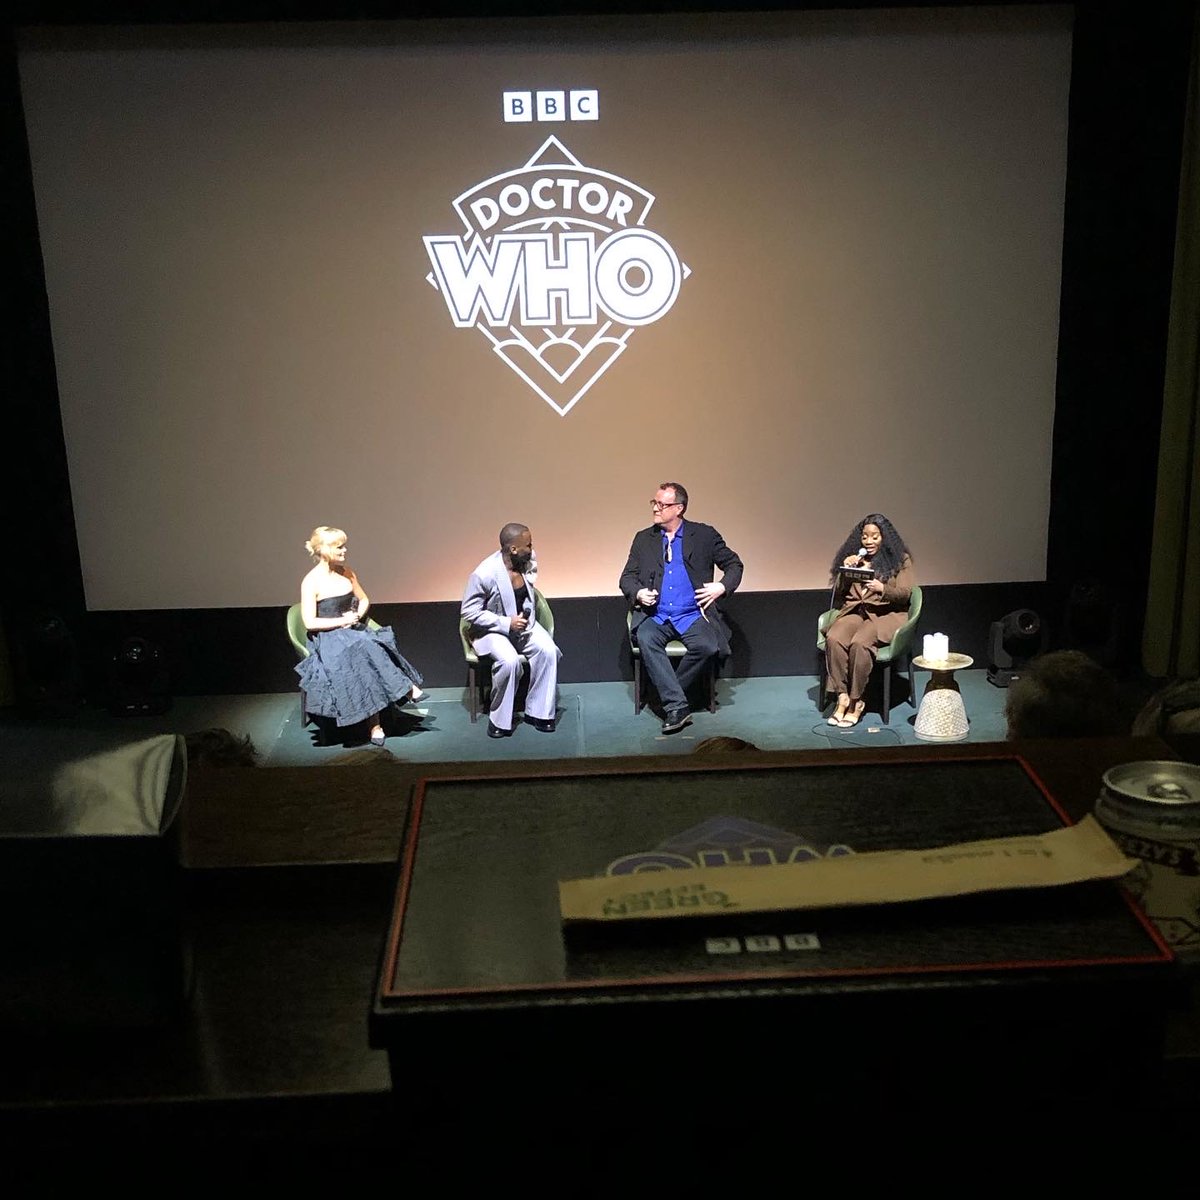 Knock knock. Who’s there? What a treat to watch the premiere of the new season of #DoctorWho